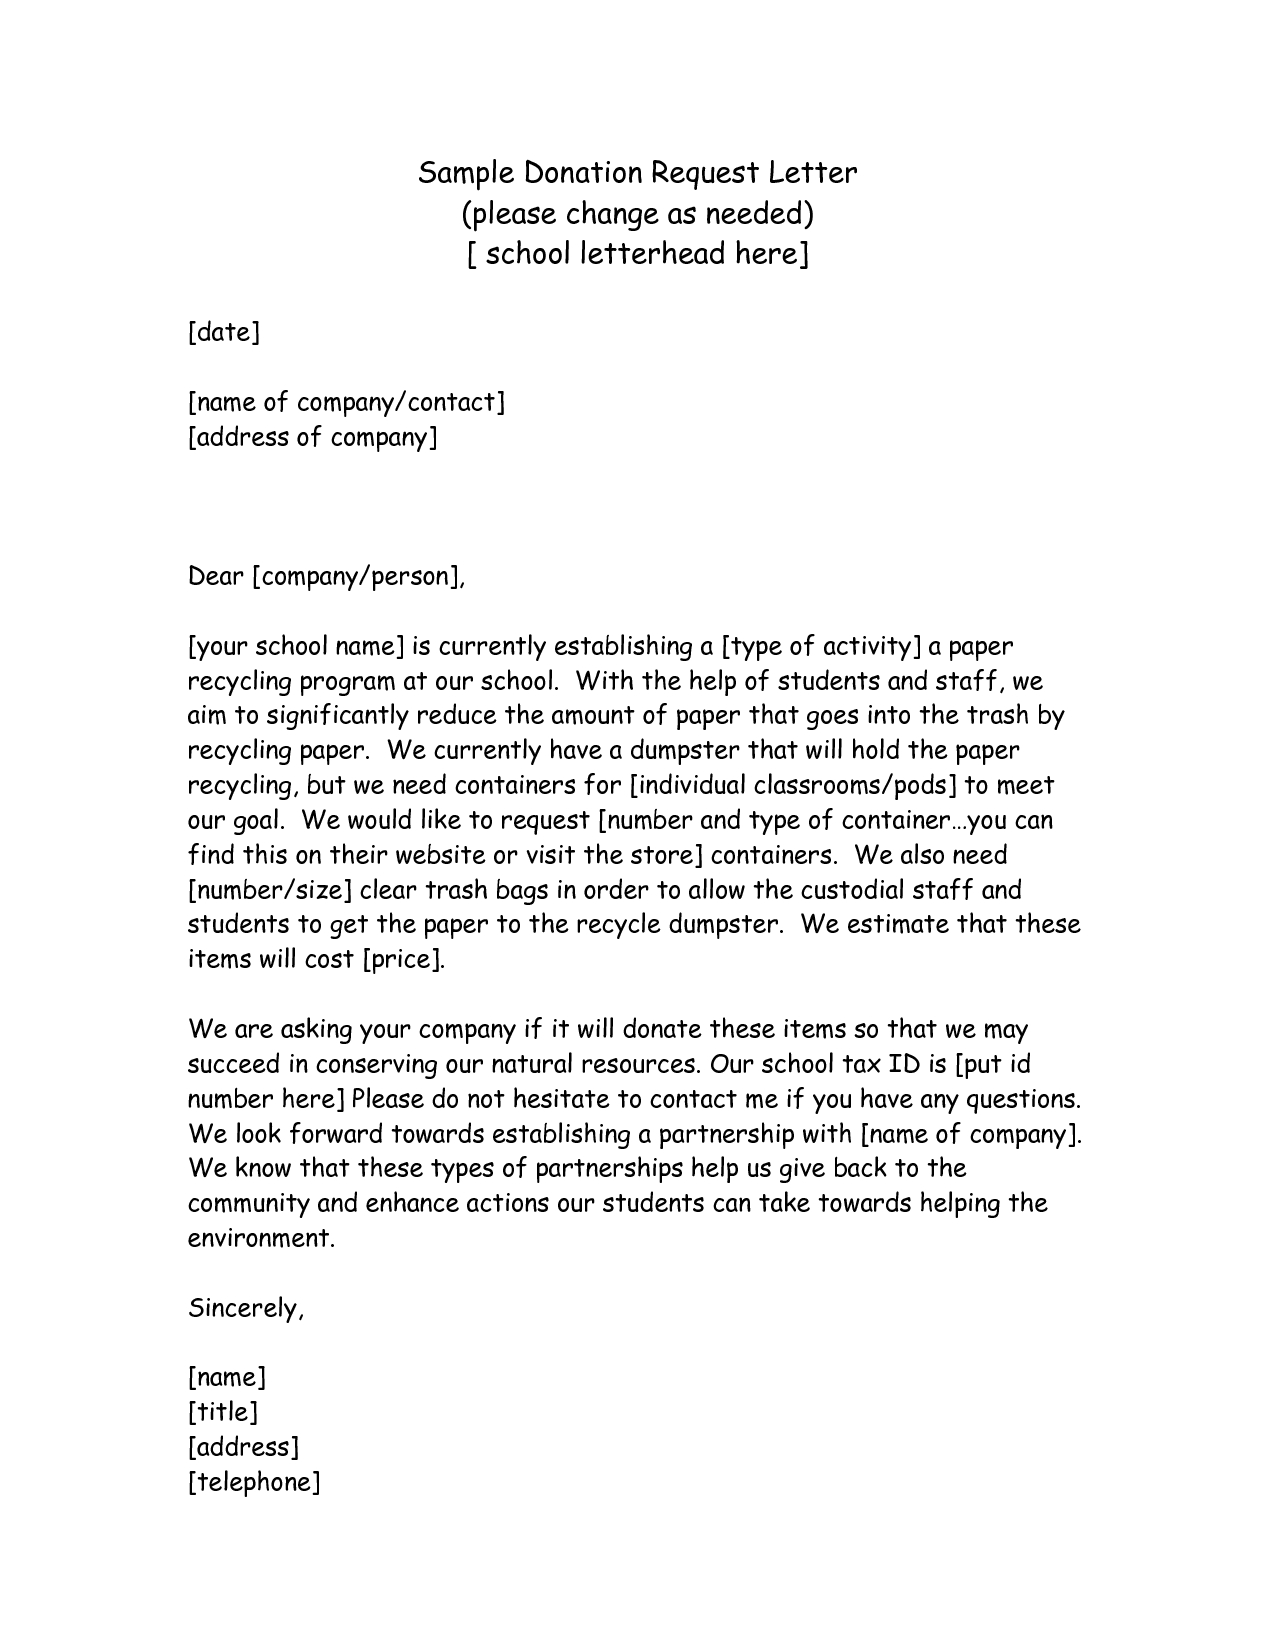 Sponsorship Letter Template for Non Profit - Examples for Donation Letters